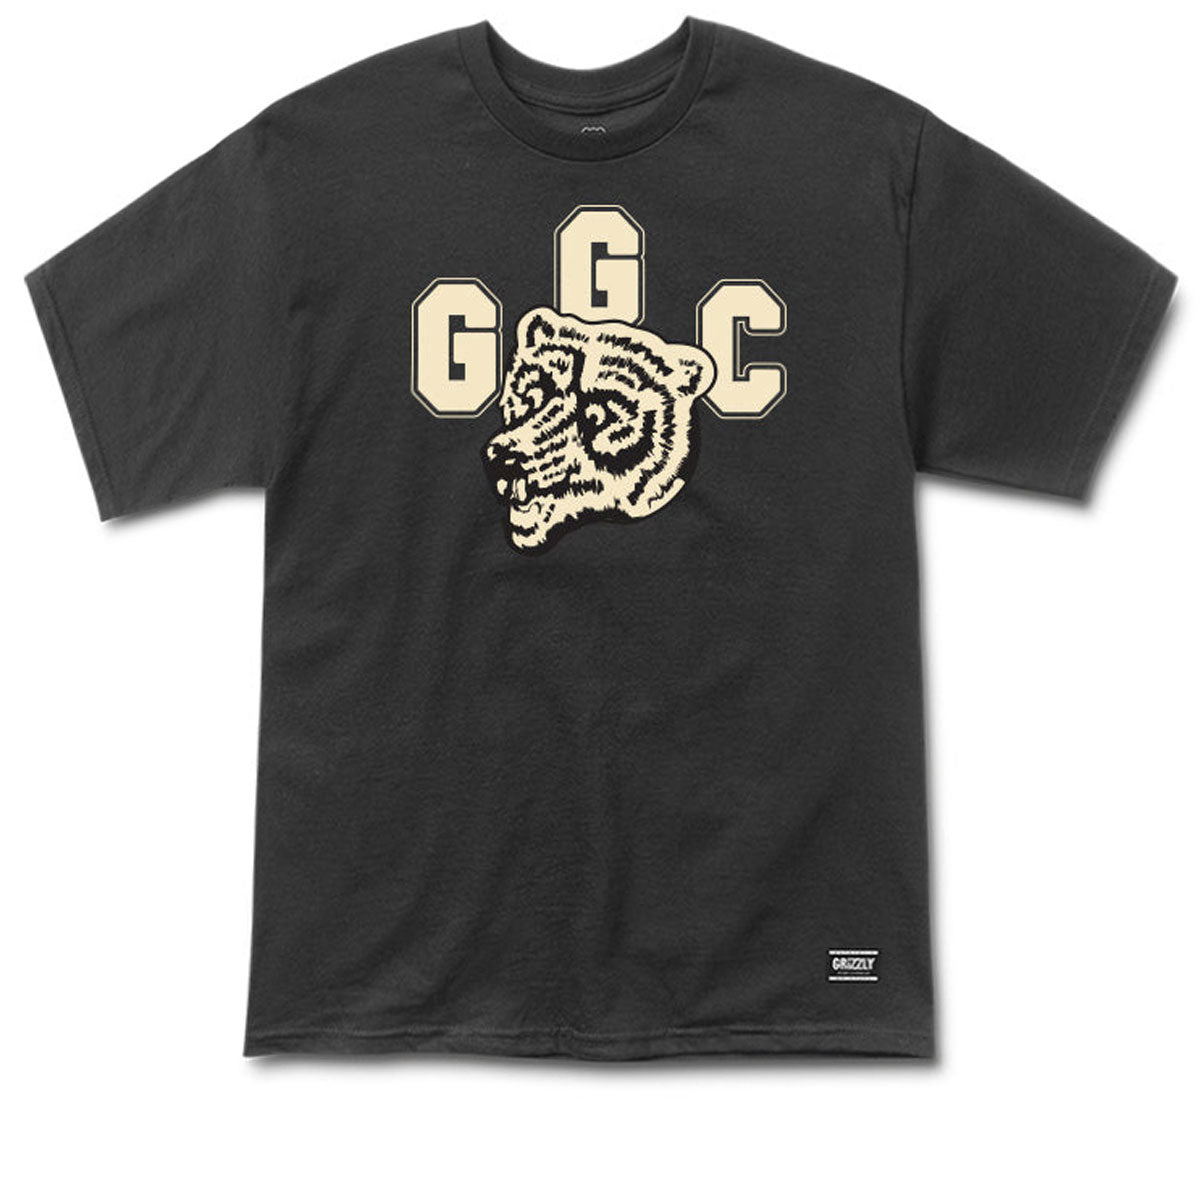 Grizzly Mascot T-Shirt - Black/White image 1